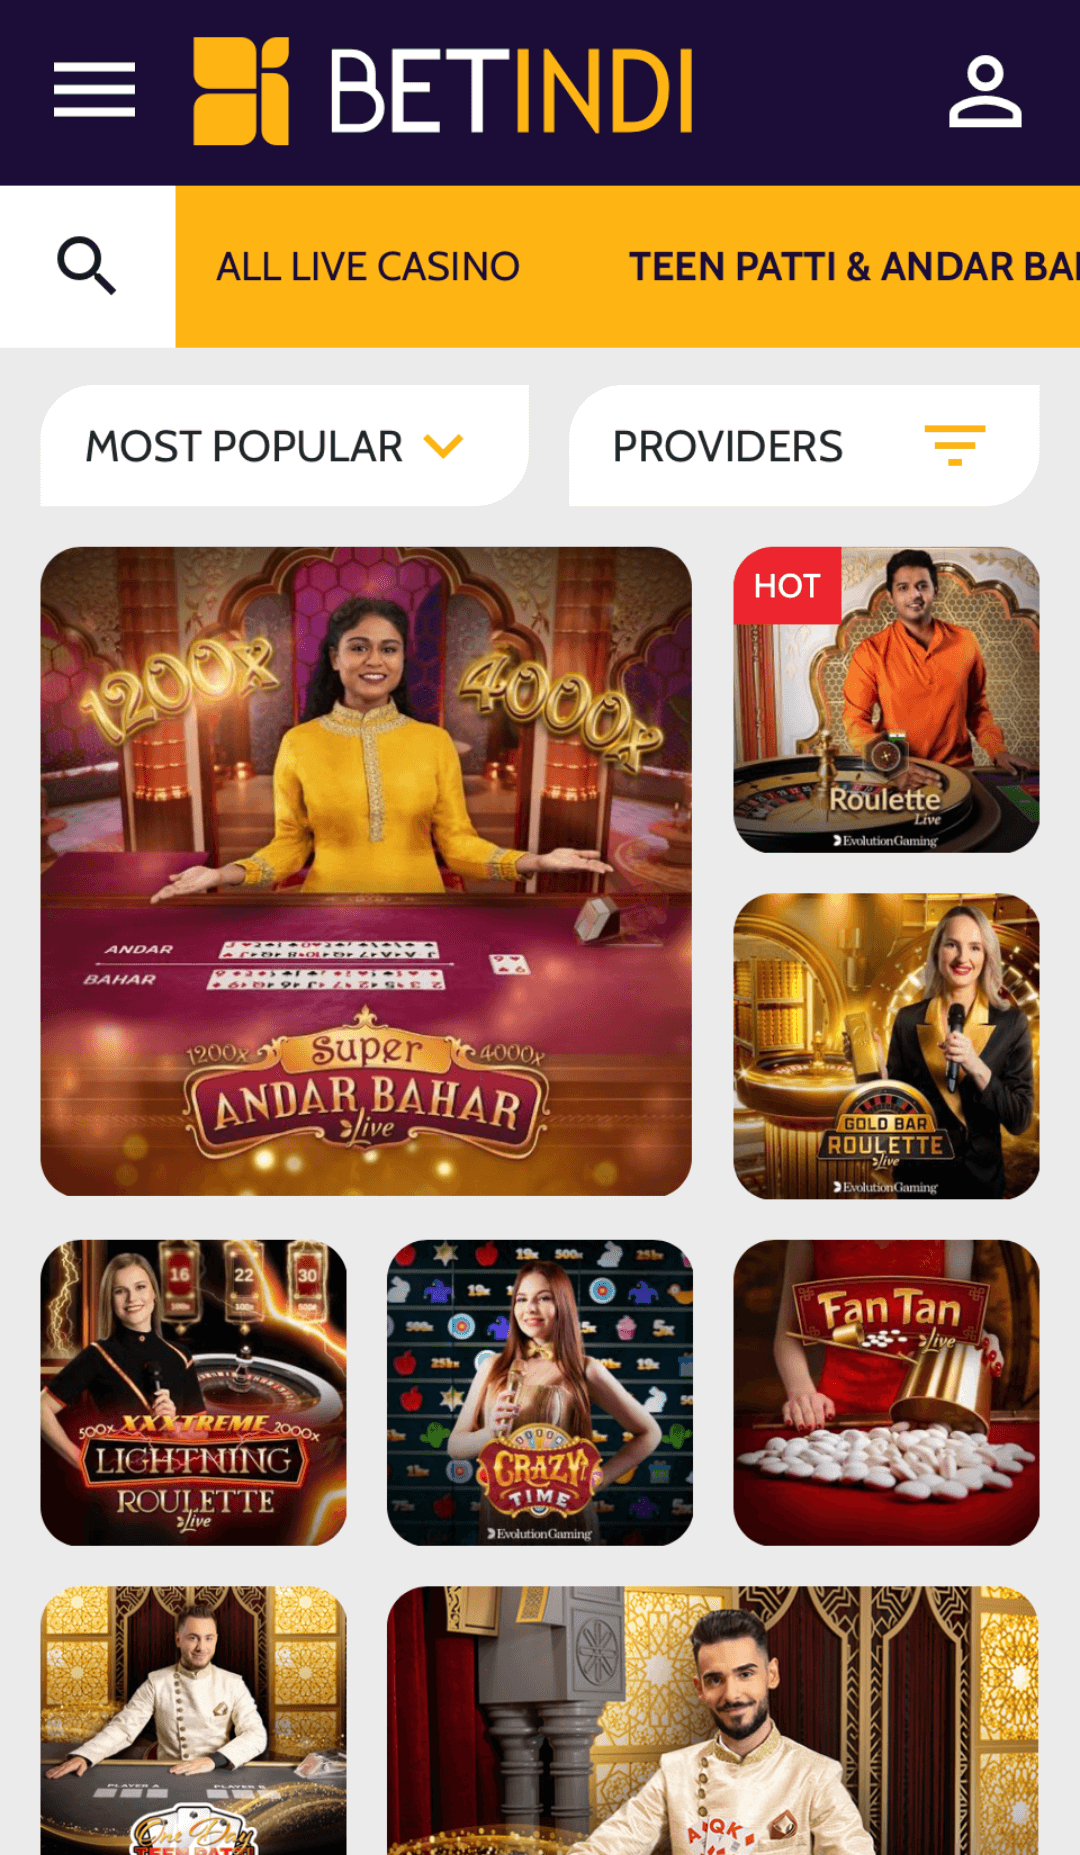 Live casino in Betindi app will allow you to play a variety of gambling games with live dealers